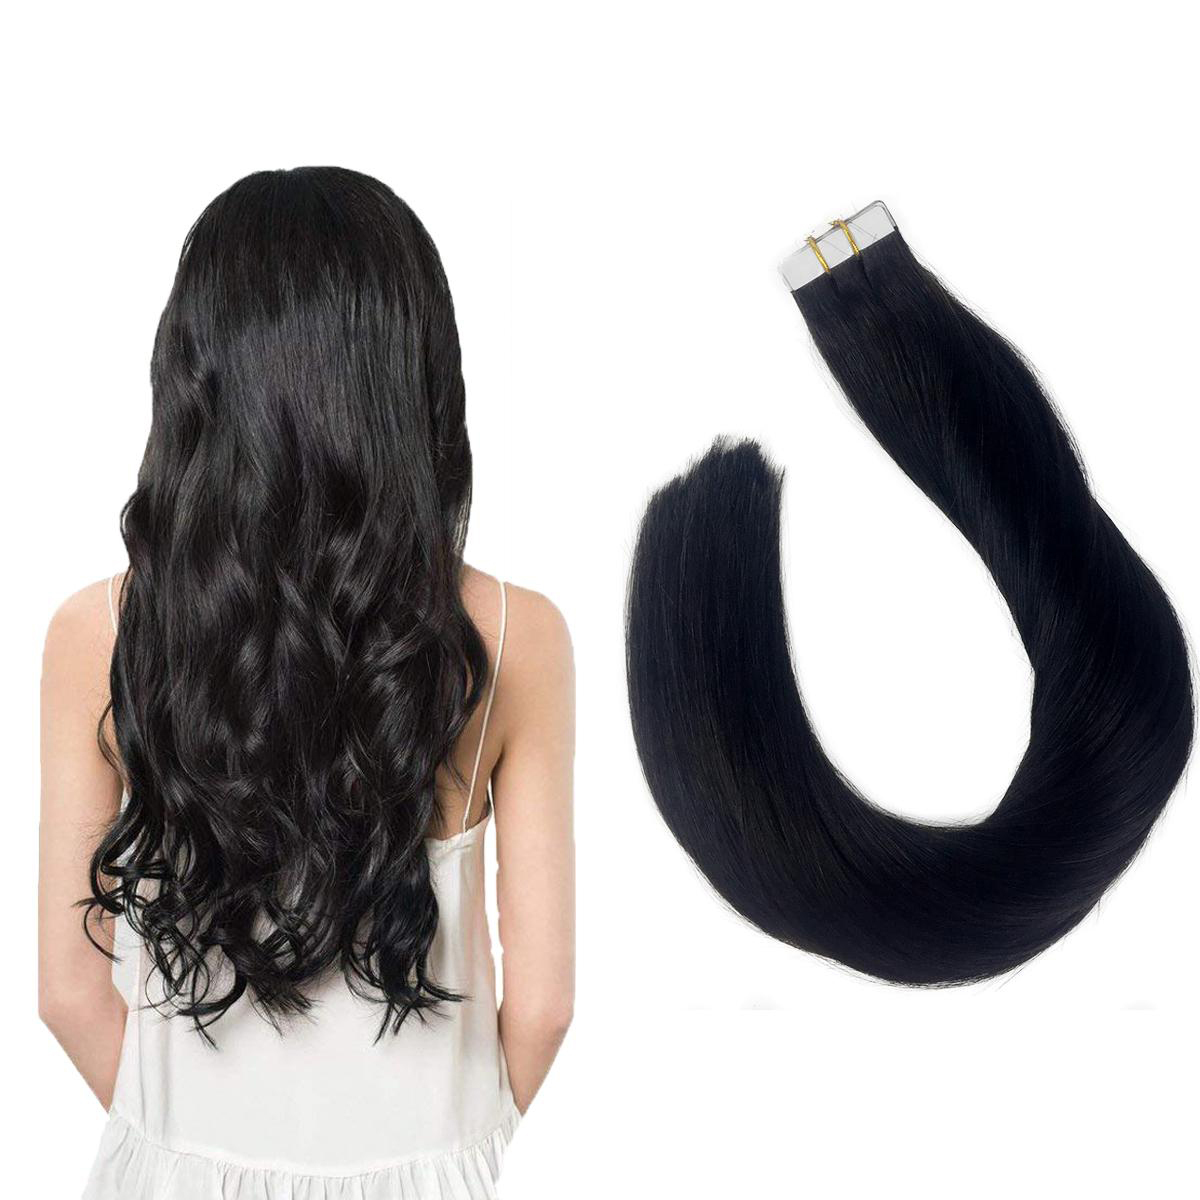 Weft Human Hair Extensions - Brazilian Remy Tape In Hair Weft Human Hair Extensions - Brazilian Remy Tape In Hair Weft Human Hair Extensions